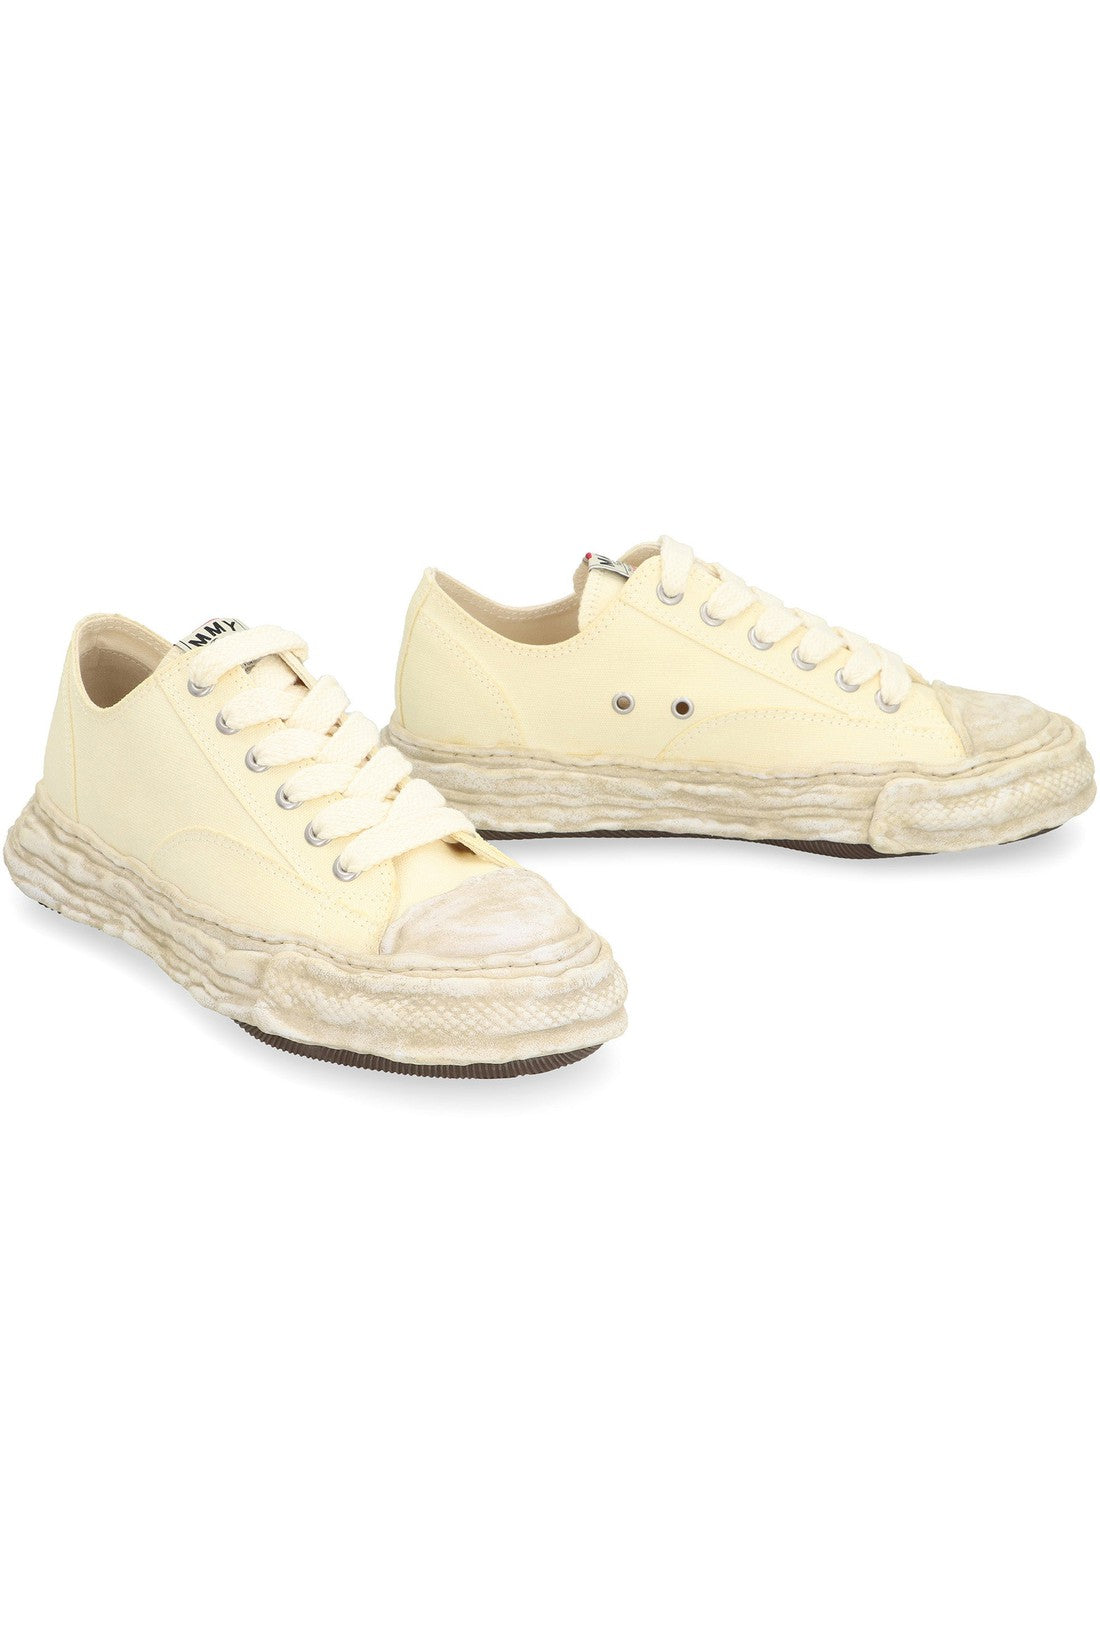 Maison Mihara Yasuhiro-OUTLET-SALE-PETERSON23 fabric low-top sneakers-ARCHIVIST